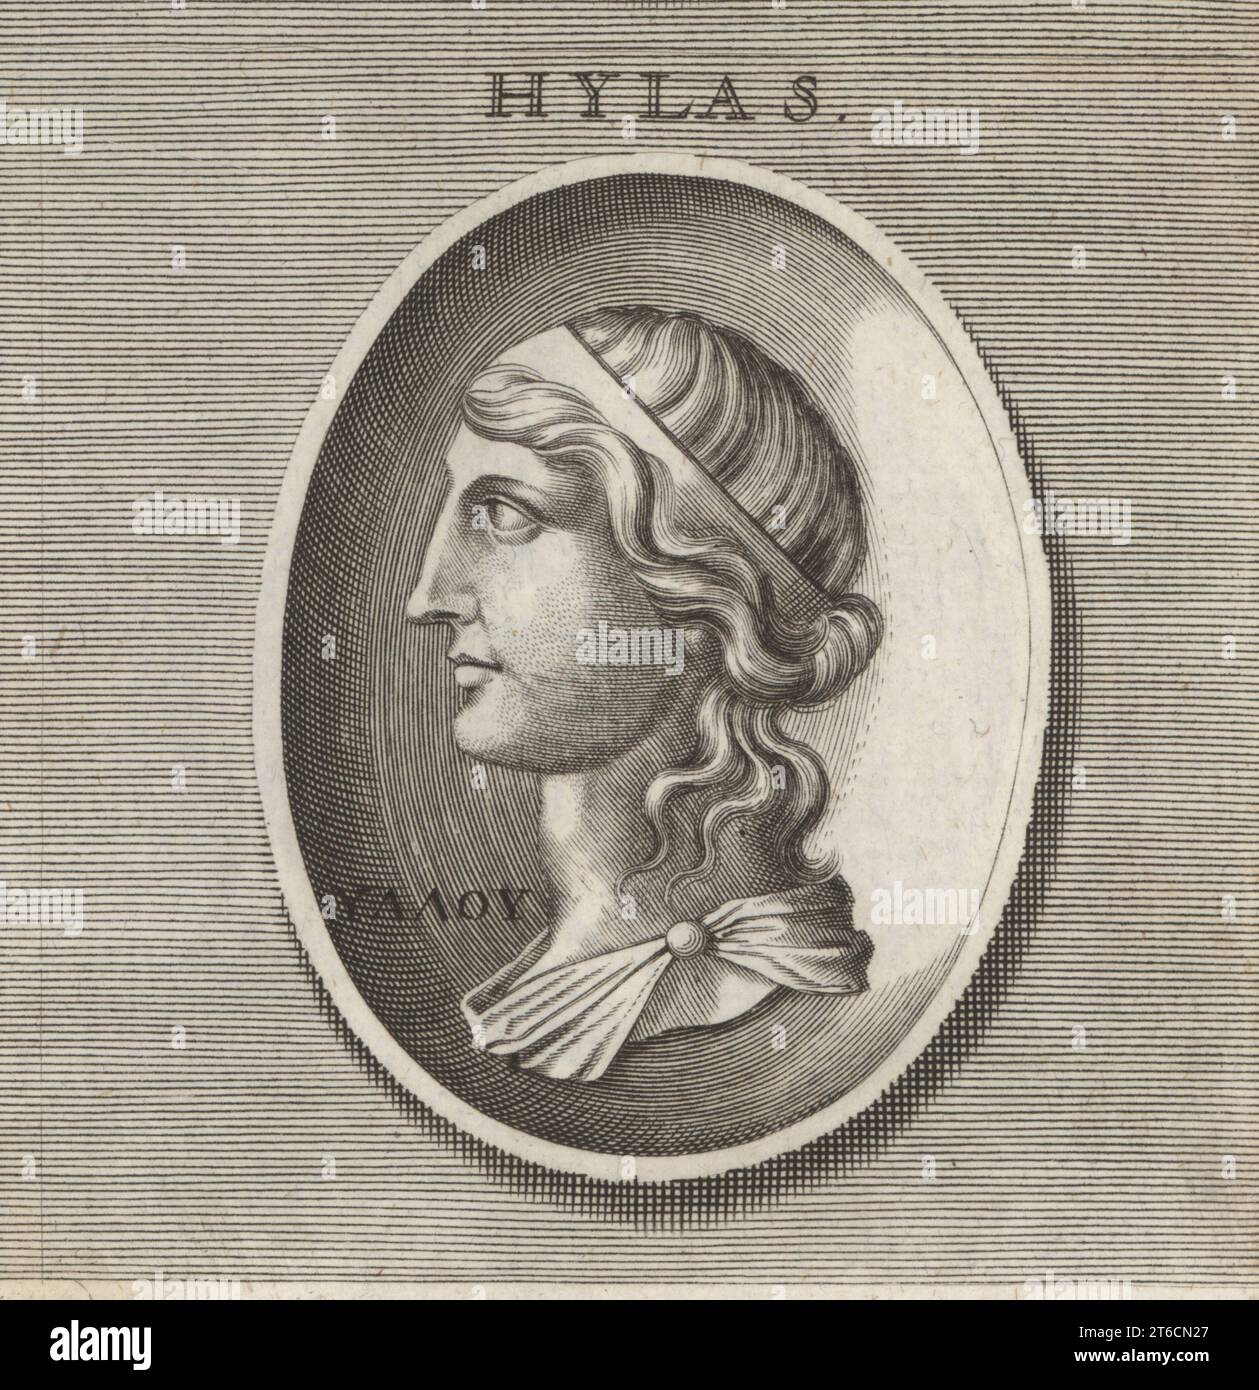 Hylas, youth who served as Greek hero Heracles's companion and servant in mythology. Copperplate engraving after an illustration by Joachim von Sandrart from his LAcademia Todesca, della Architectura, Scultura & Pittura, oder Teutsche Academie, der Edlen Bau- Bild- und Mahlerey-Kunste, German Academy of Architecture, Sculpture and Painting, Jacob von Sandrart, Nuremberg, 1675. Stock Photo